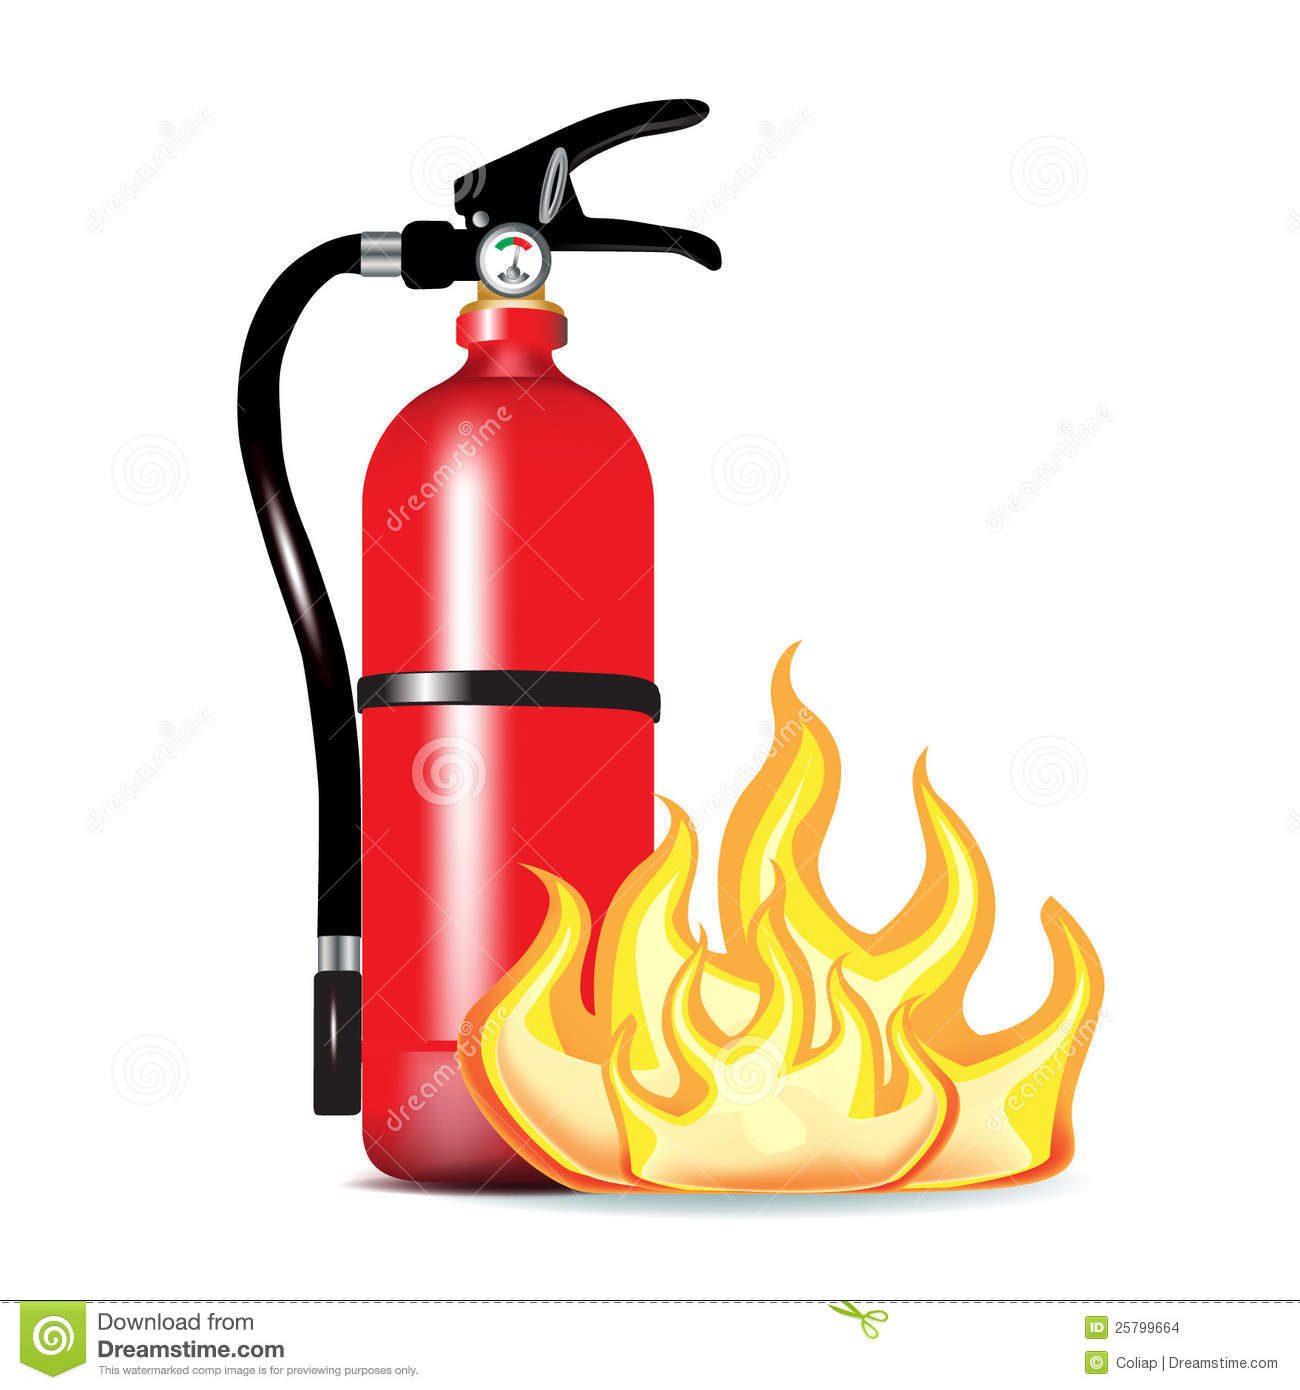 Clipart. Fire extinguisher .